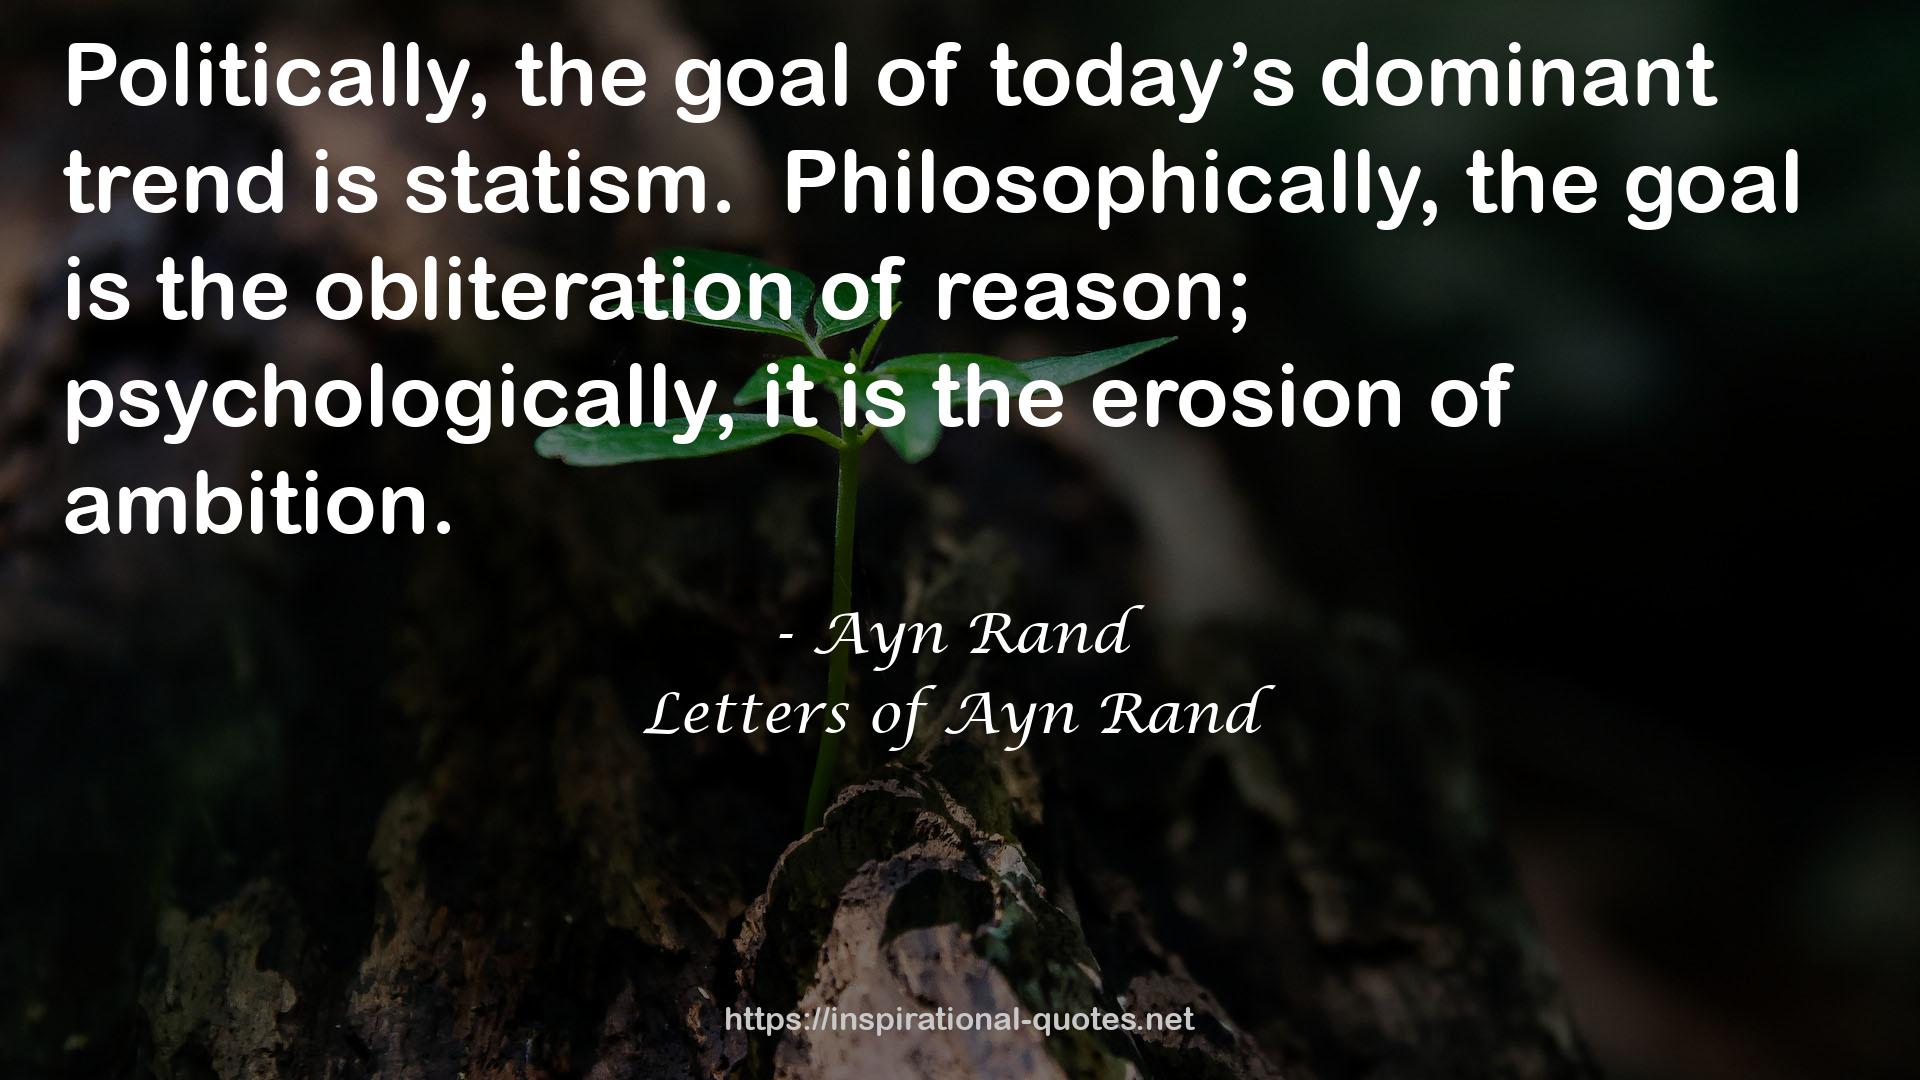 Letters of Ayn Rand QUOTES